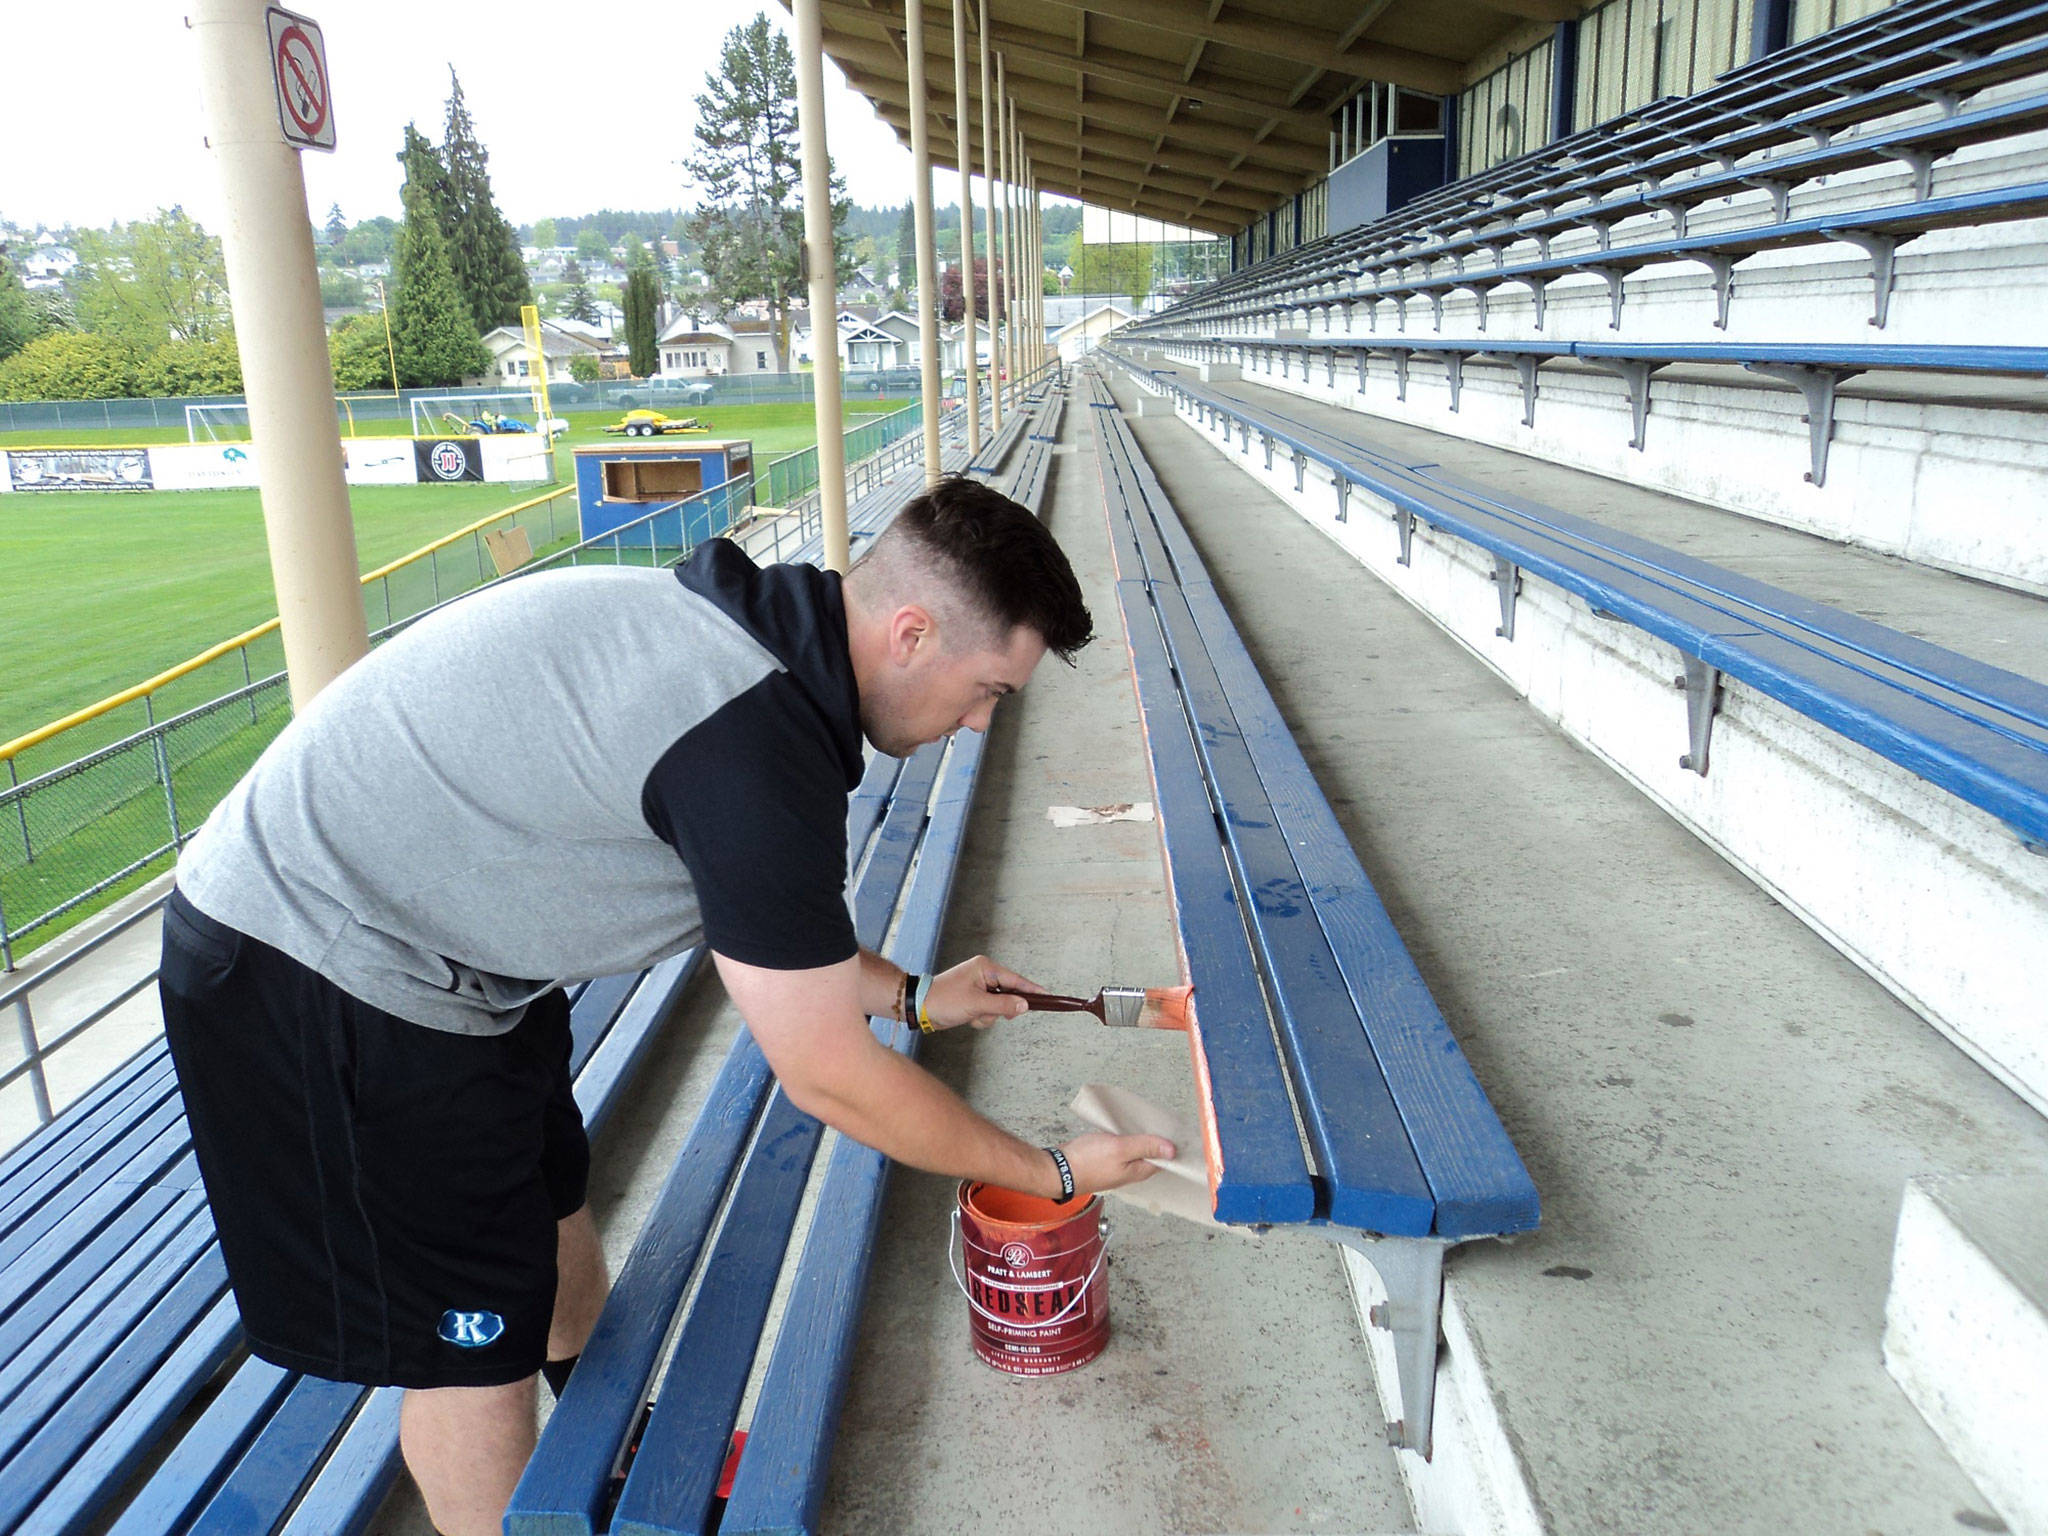 Pierre LaBossiere/Peninsula Daily News                                Lefties first baseman Joey Galeno was one of several players working hard on sprucing up Civic Field this week in preparation for the Lefties’ opener today. Here, Galeno, from Pacific University in Forest Grove, Ore., is painting bleachers, while other players were painting the locker room in Lefties’ orange and blue.